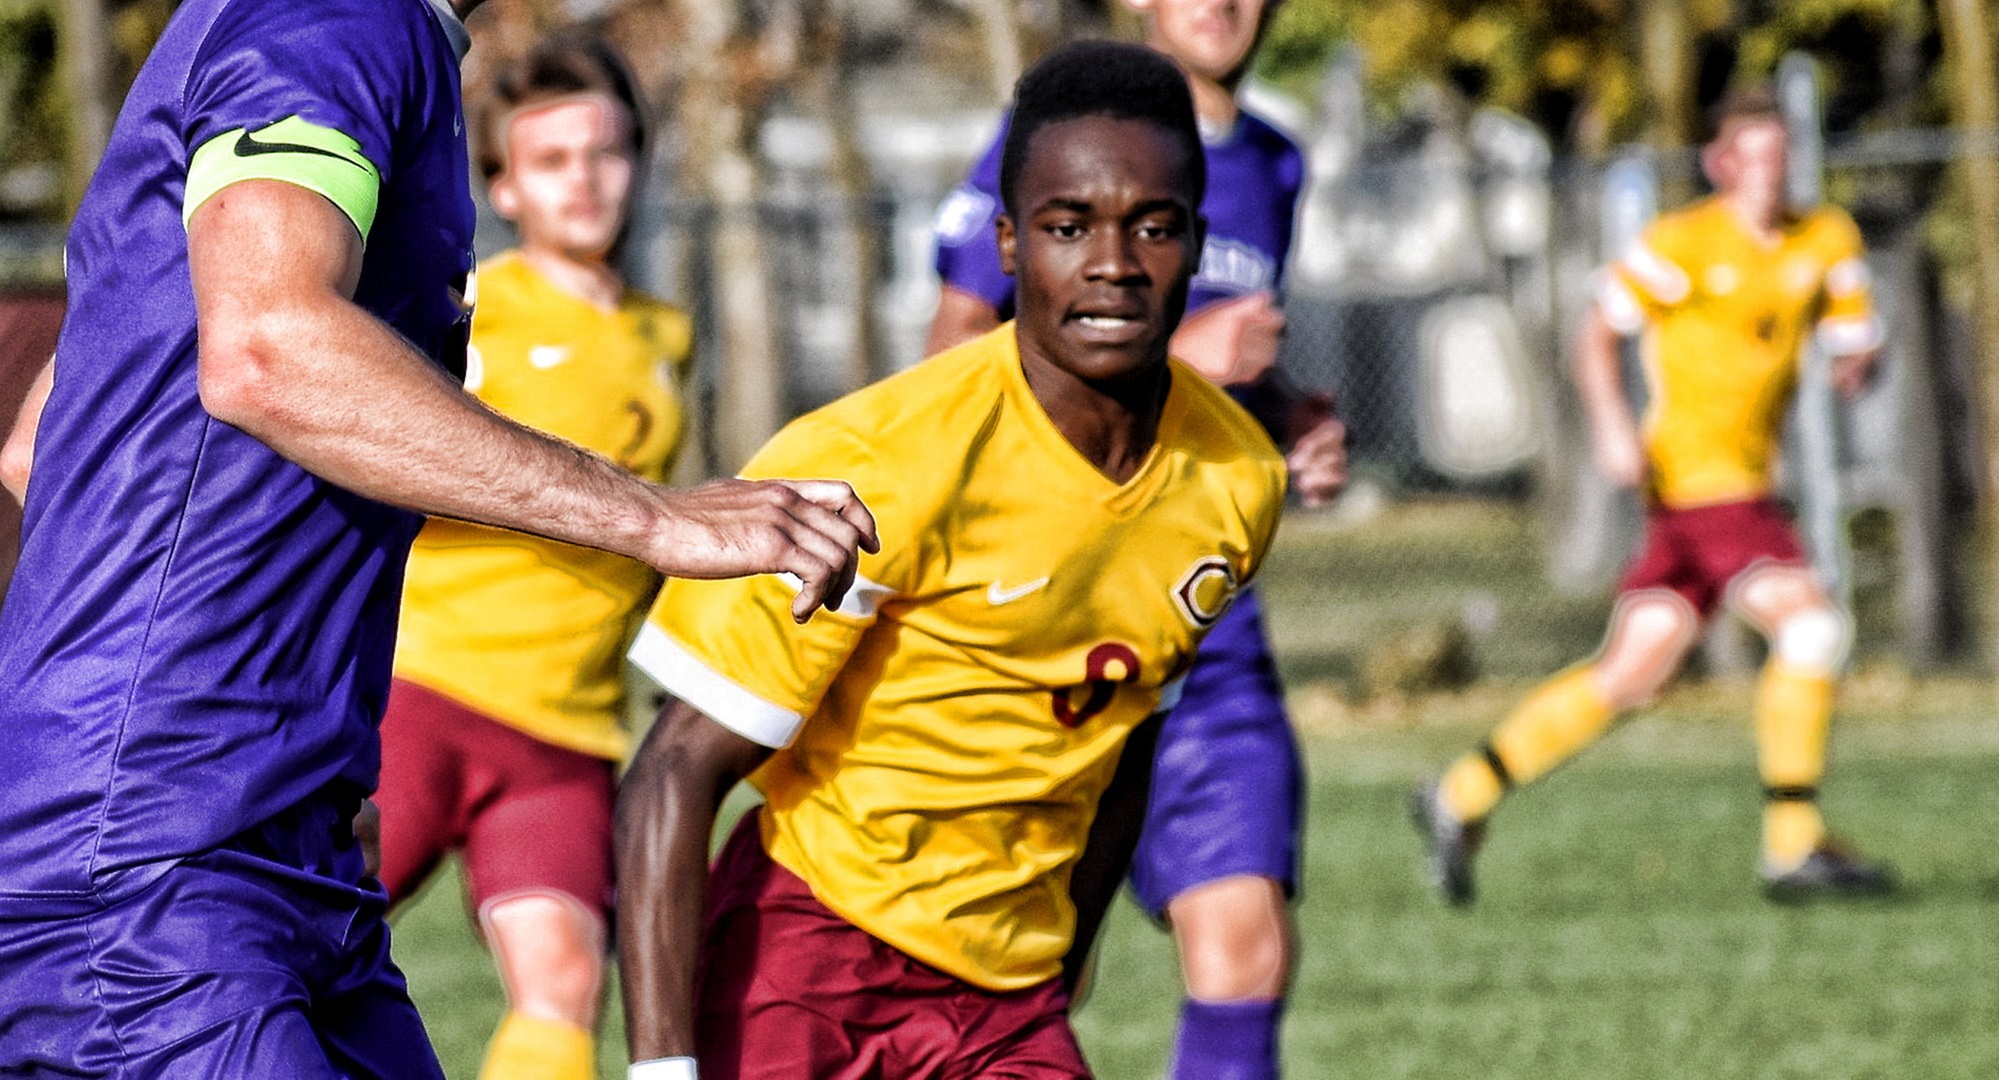 Aronah Mukhtar scored a pair of goals in the Cobbers' 4-1 win at Minn.-Morris.